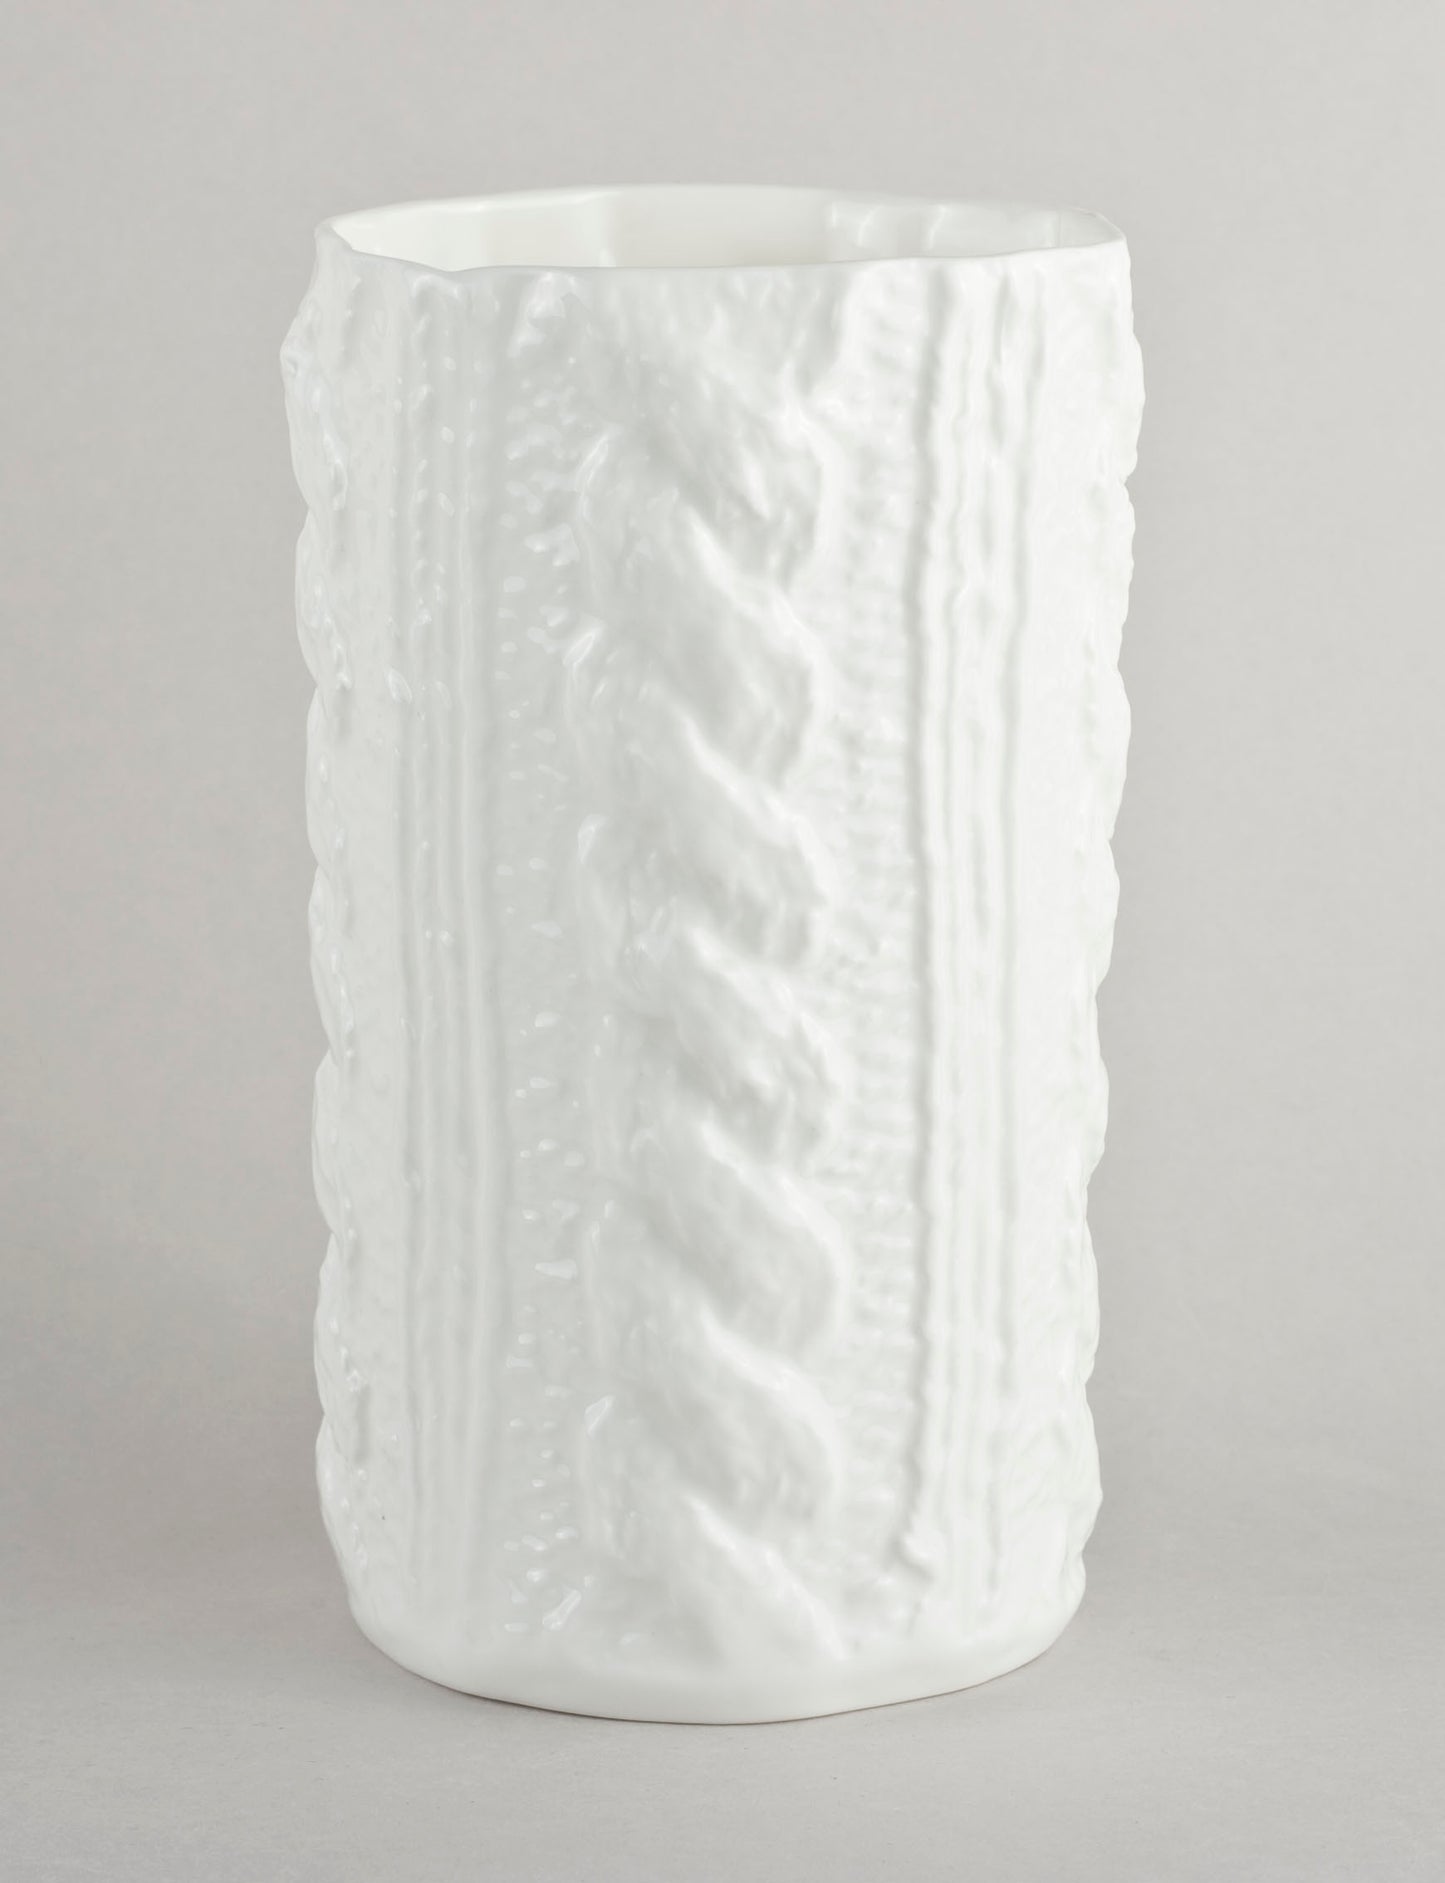 Covid 1.3. Knitted Vase